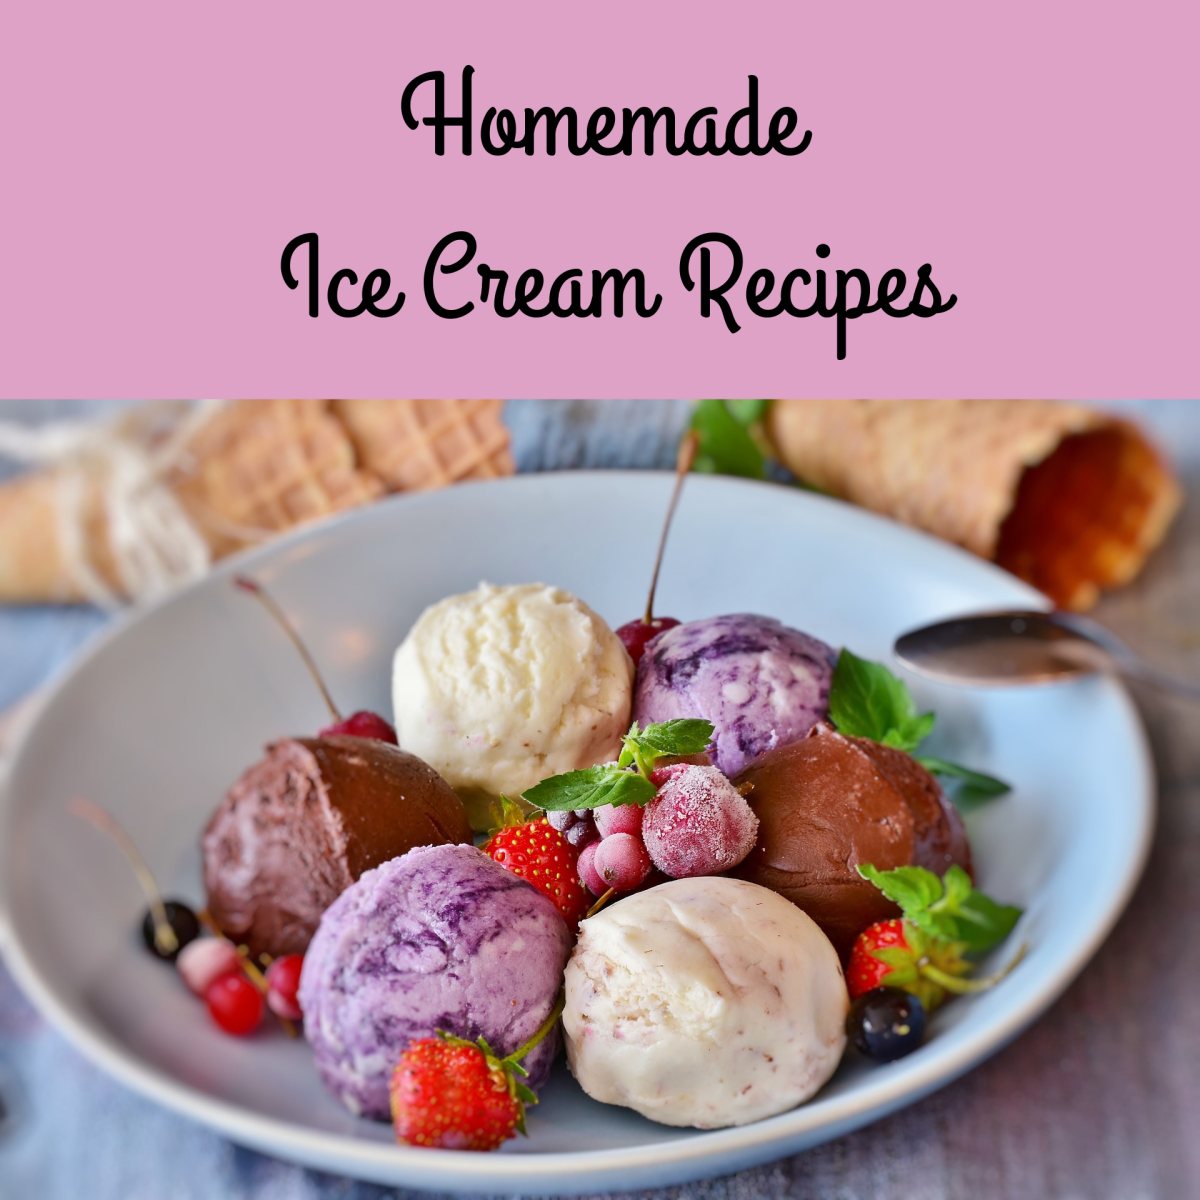 Nothing beats homemade old-fashioned ice cream!